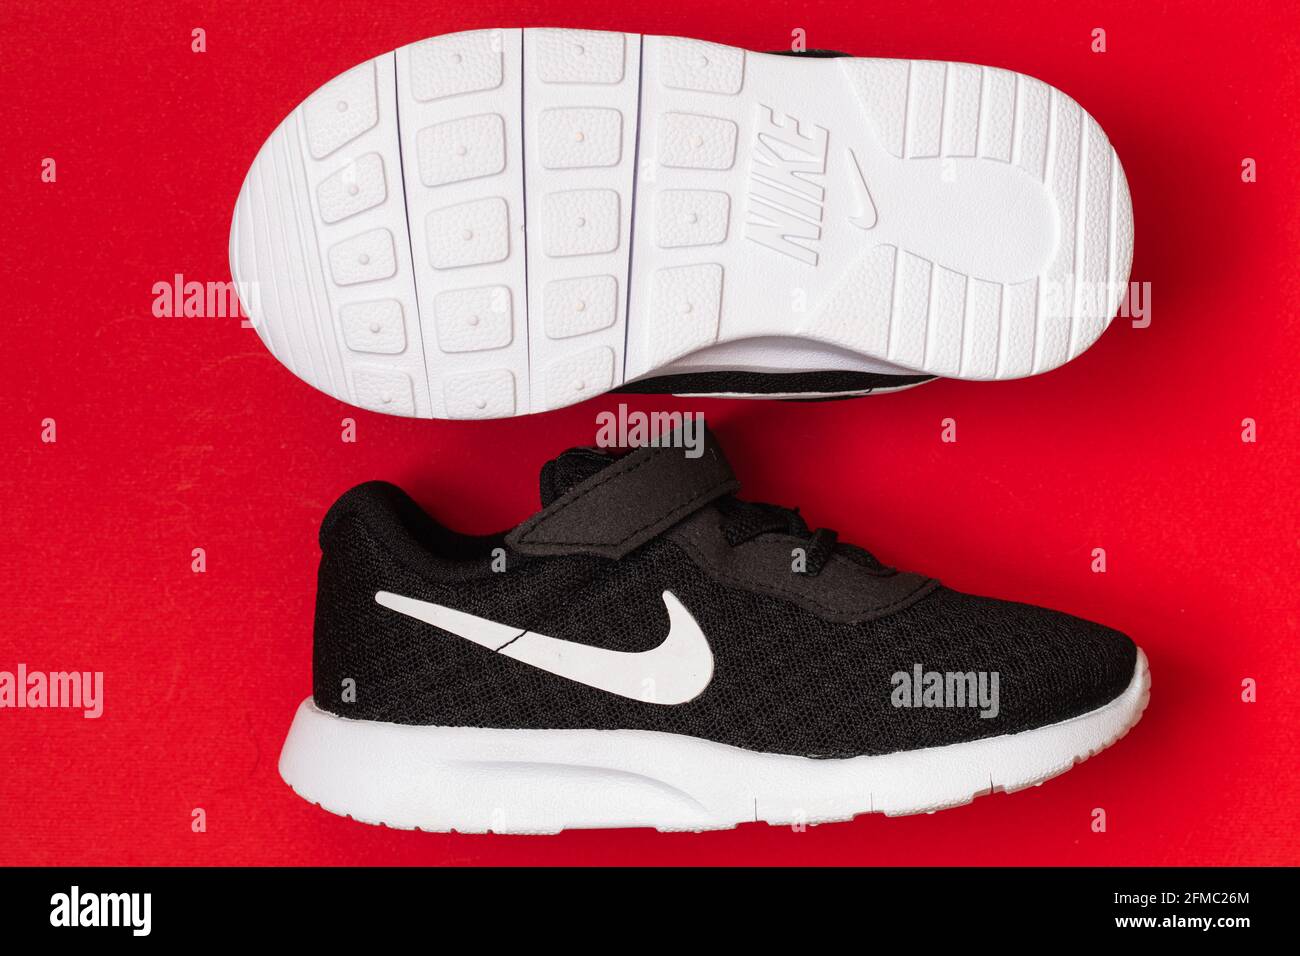 Page 3 - Nike Shoes High Resolution Stock Photography and Images - Alamy